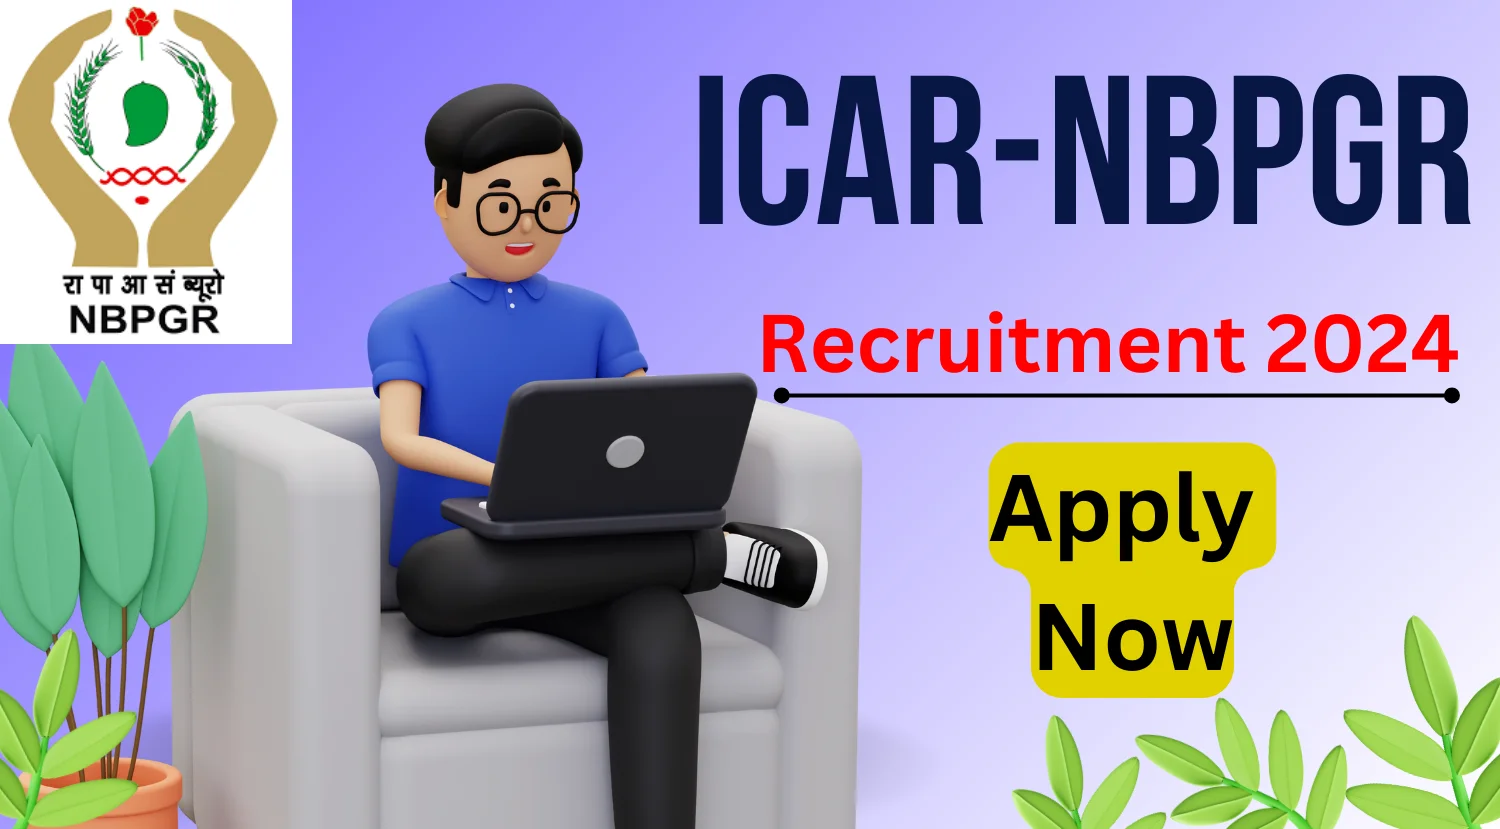 ICAR-NBPGR Recruitment 2024 Notification Out